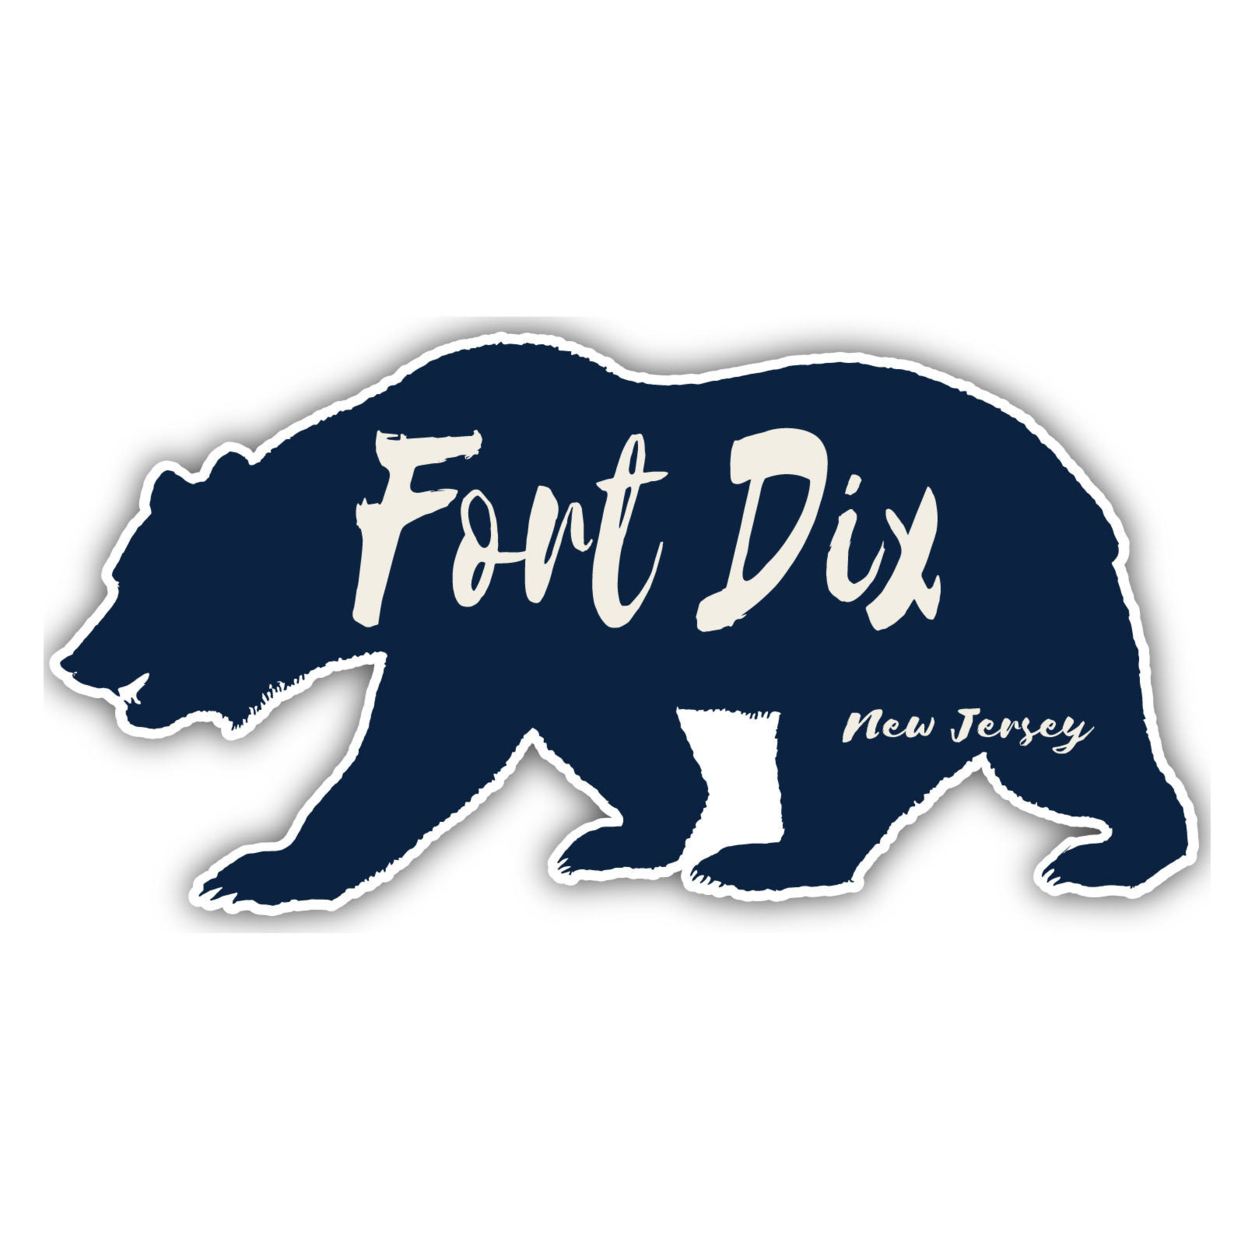 Fort Dix New Jersey Souvenir Decorative Stickers (Choose Theme And Size) - 4-Pack, 4-Inch, Great Outdoors